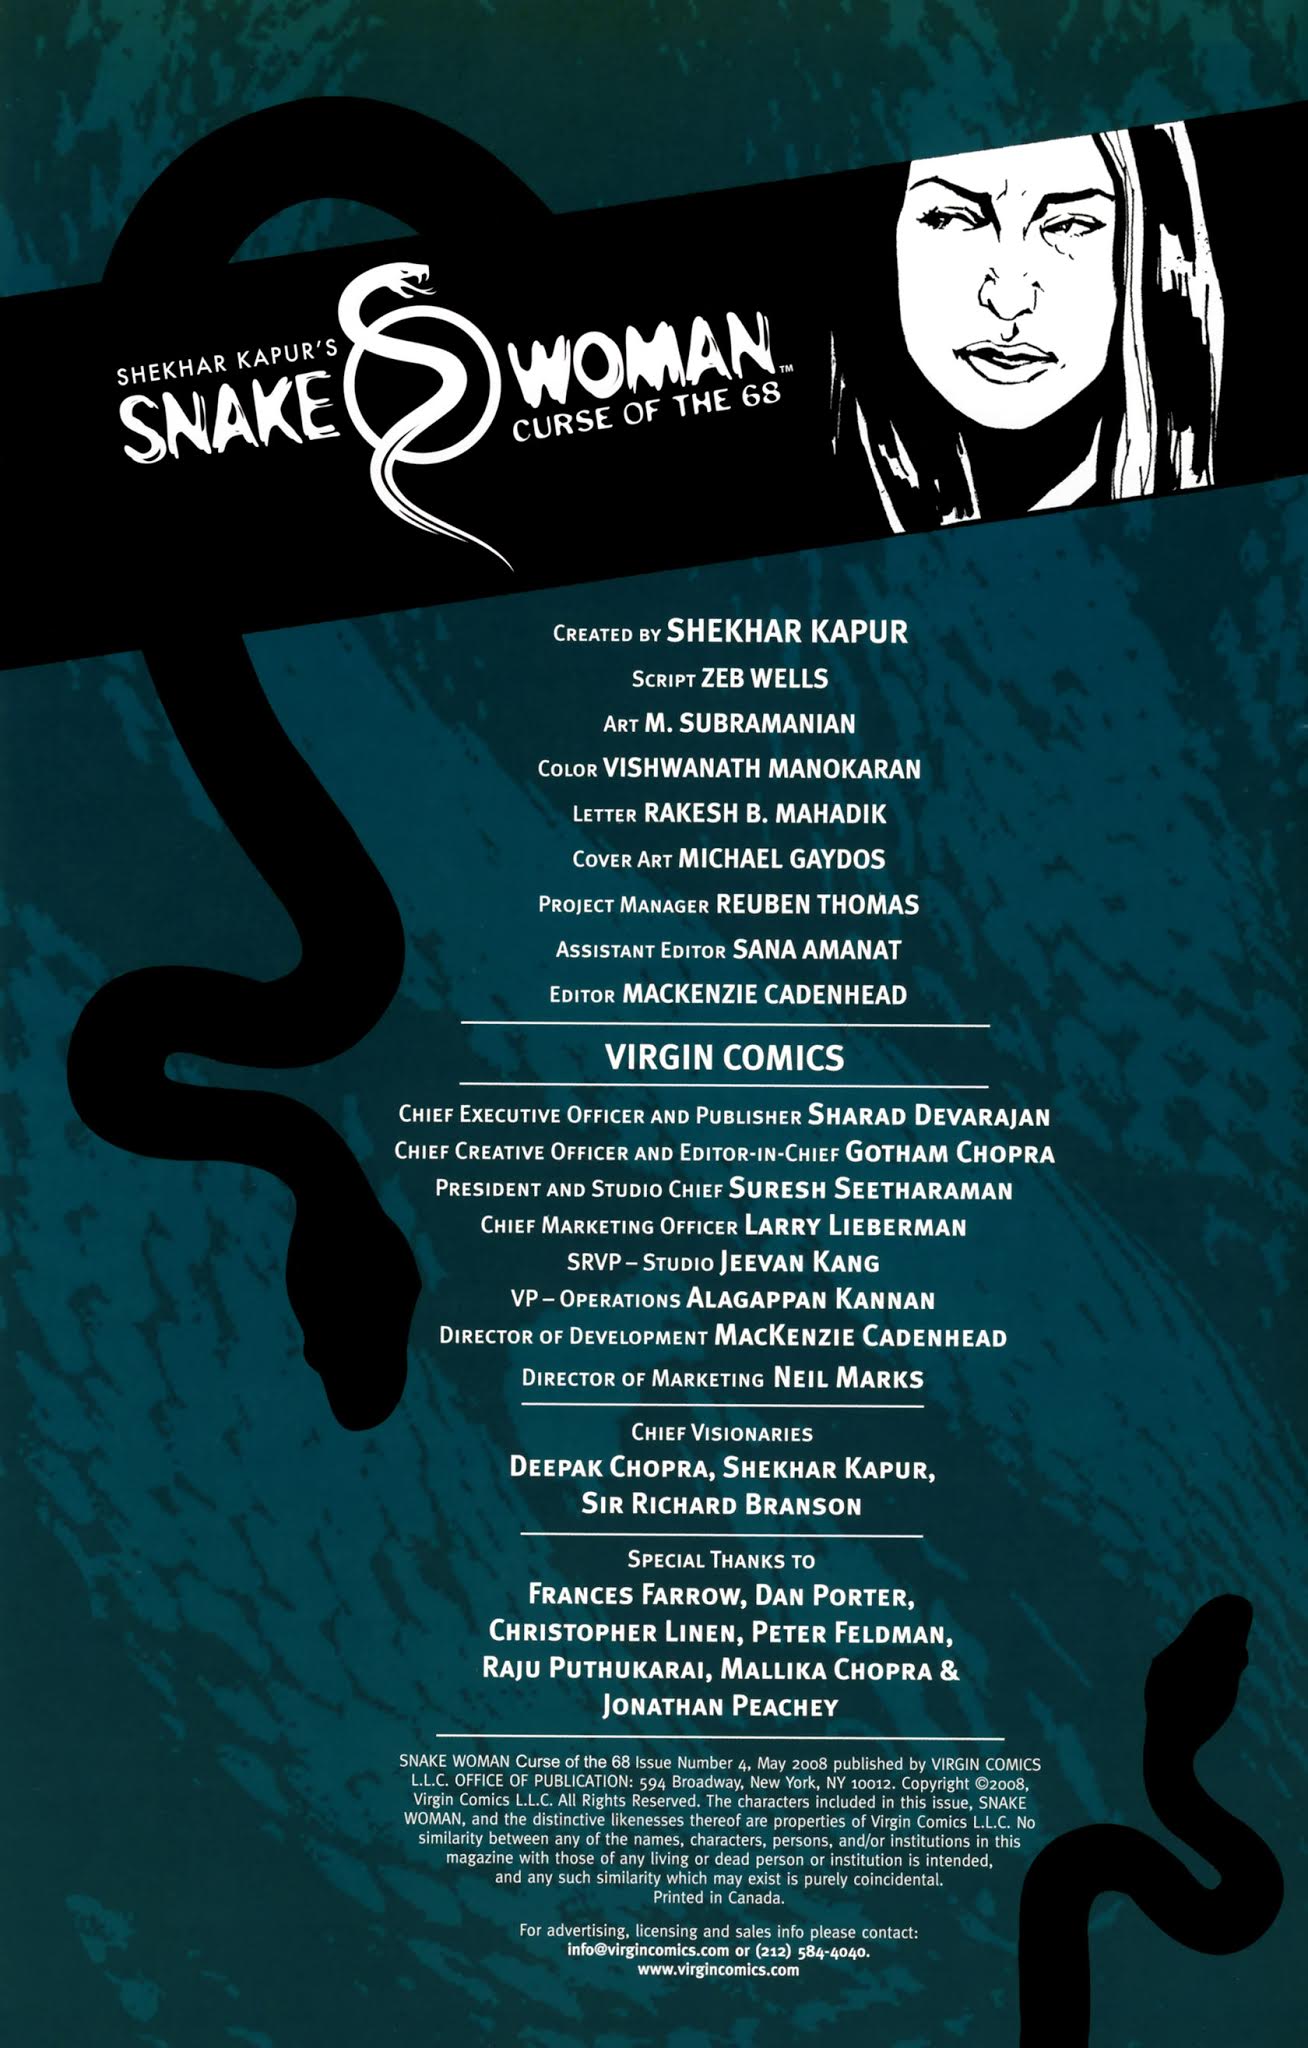 Read online Snake Woman Curse of the 68 comic -  Issue #4 - 2